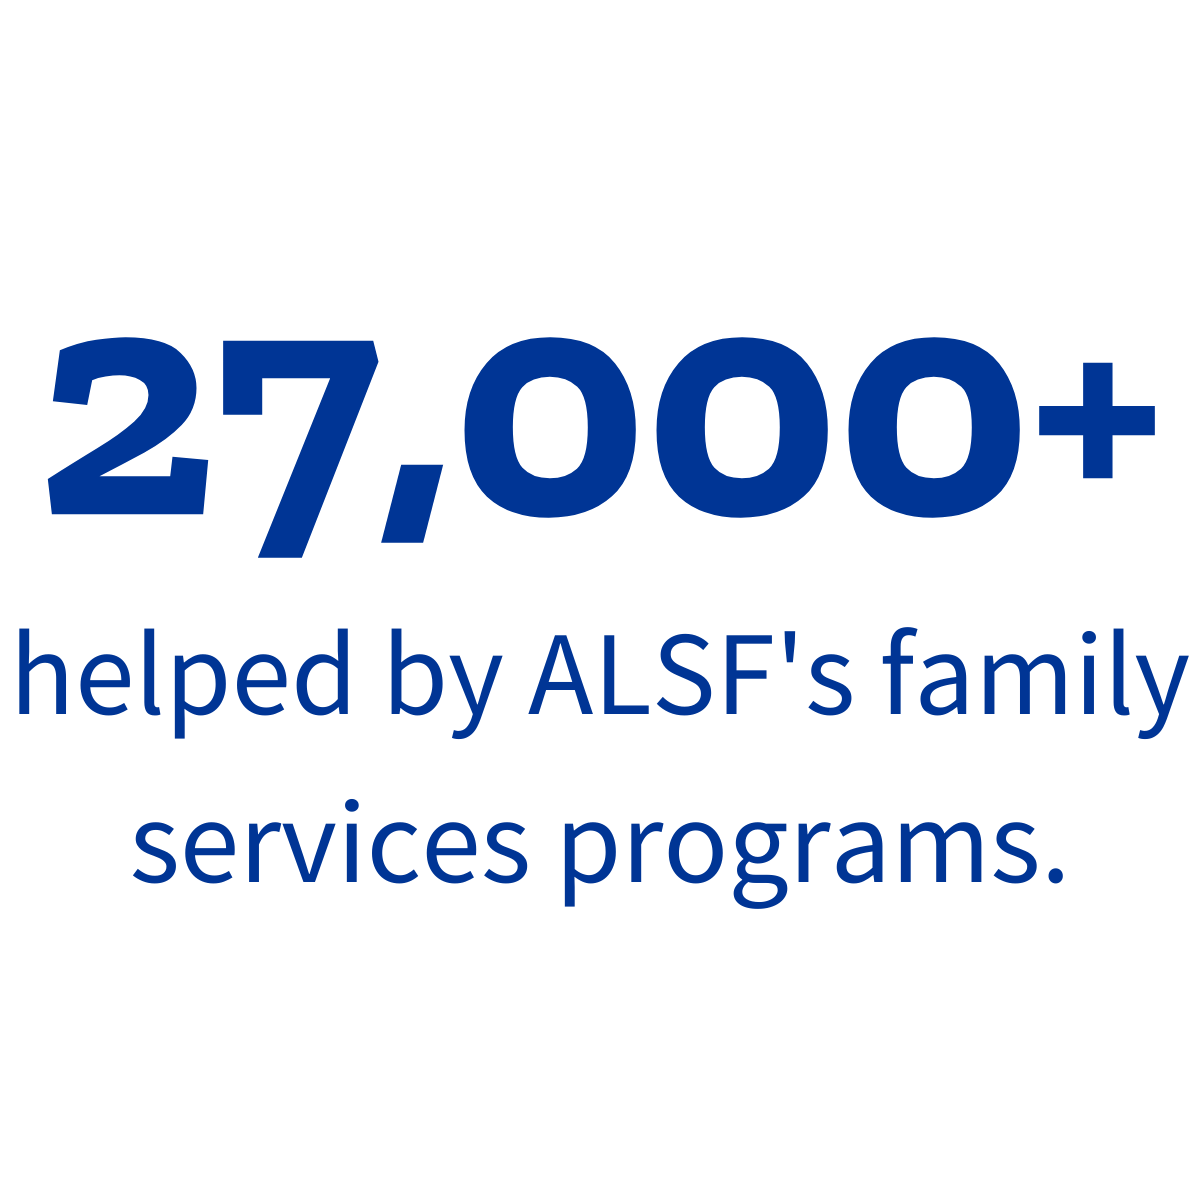 27,000+ helped by ALSF's family service programs